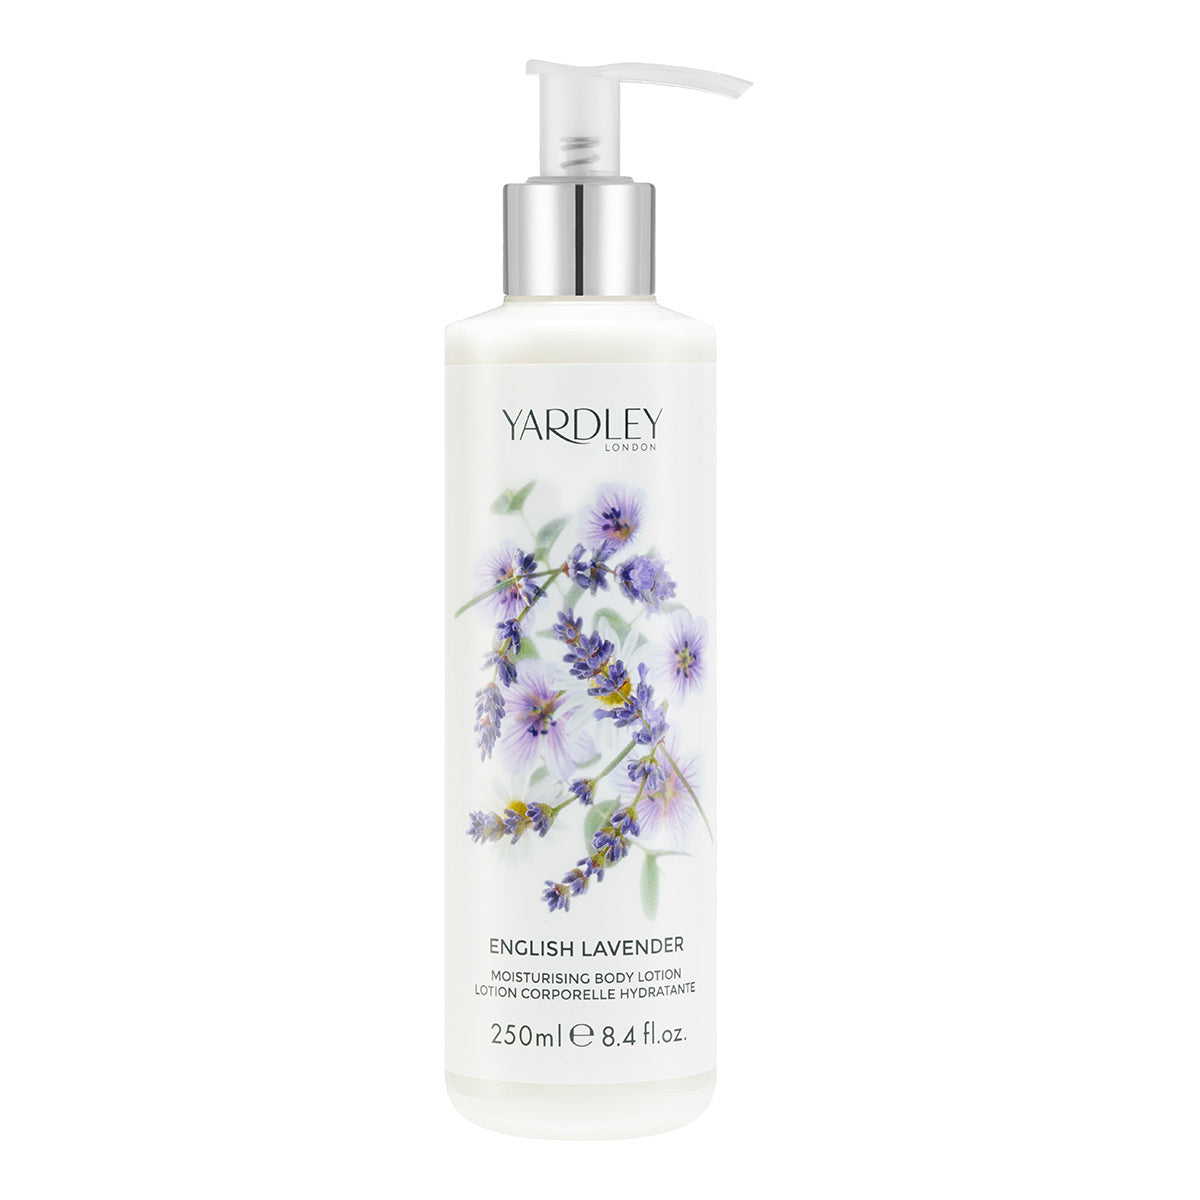 Primary image of English Lavender Body Lotion